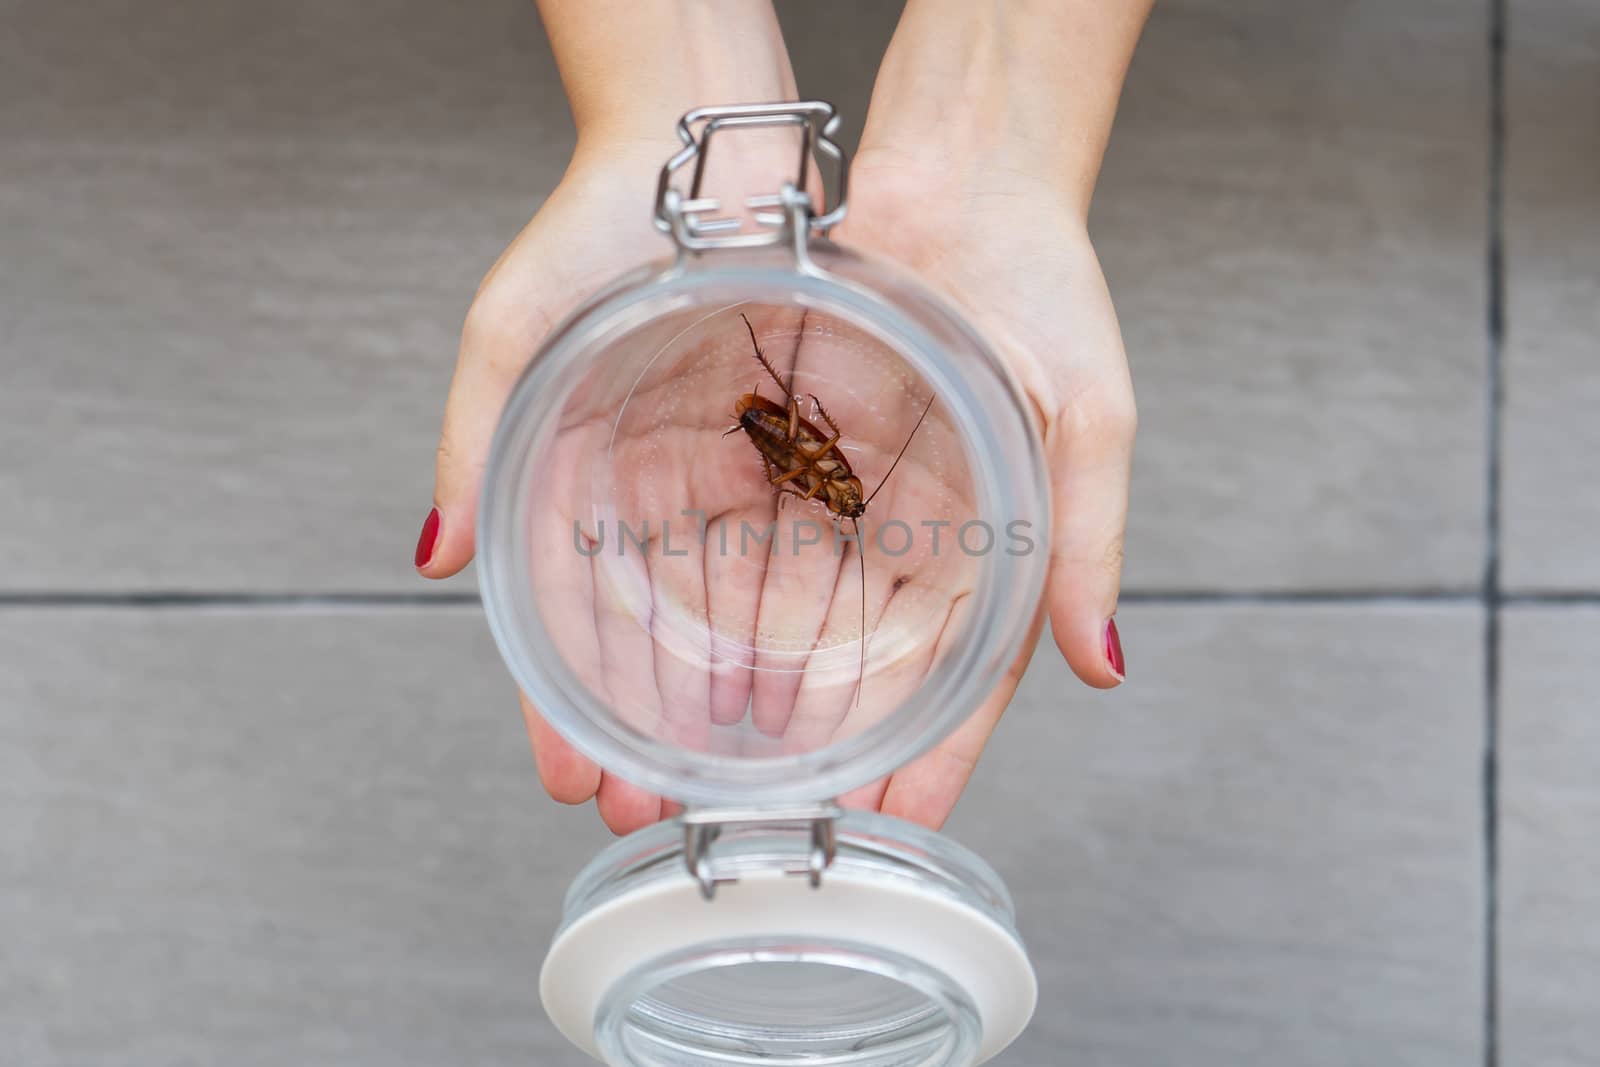 The girl holds on her palm a glass jar with a cockroach inside by Try_my_best